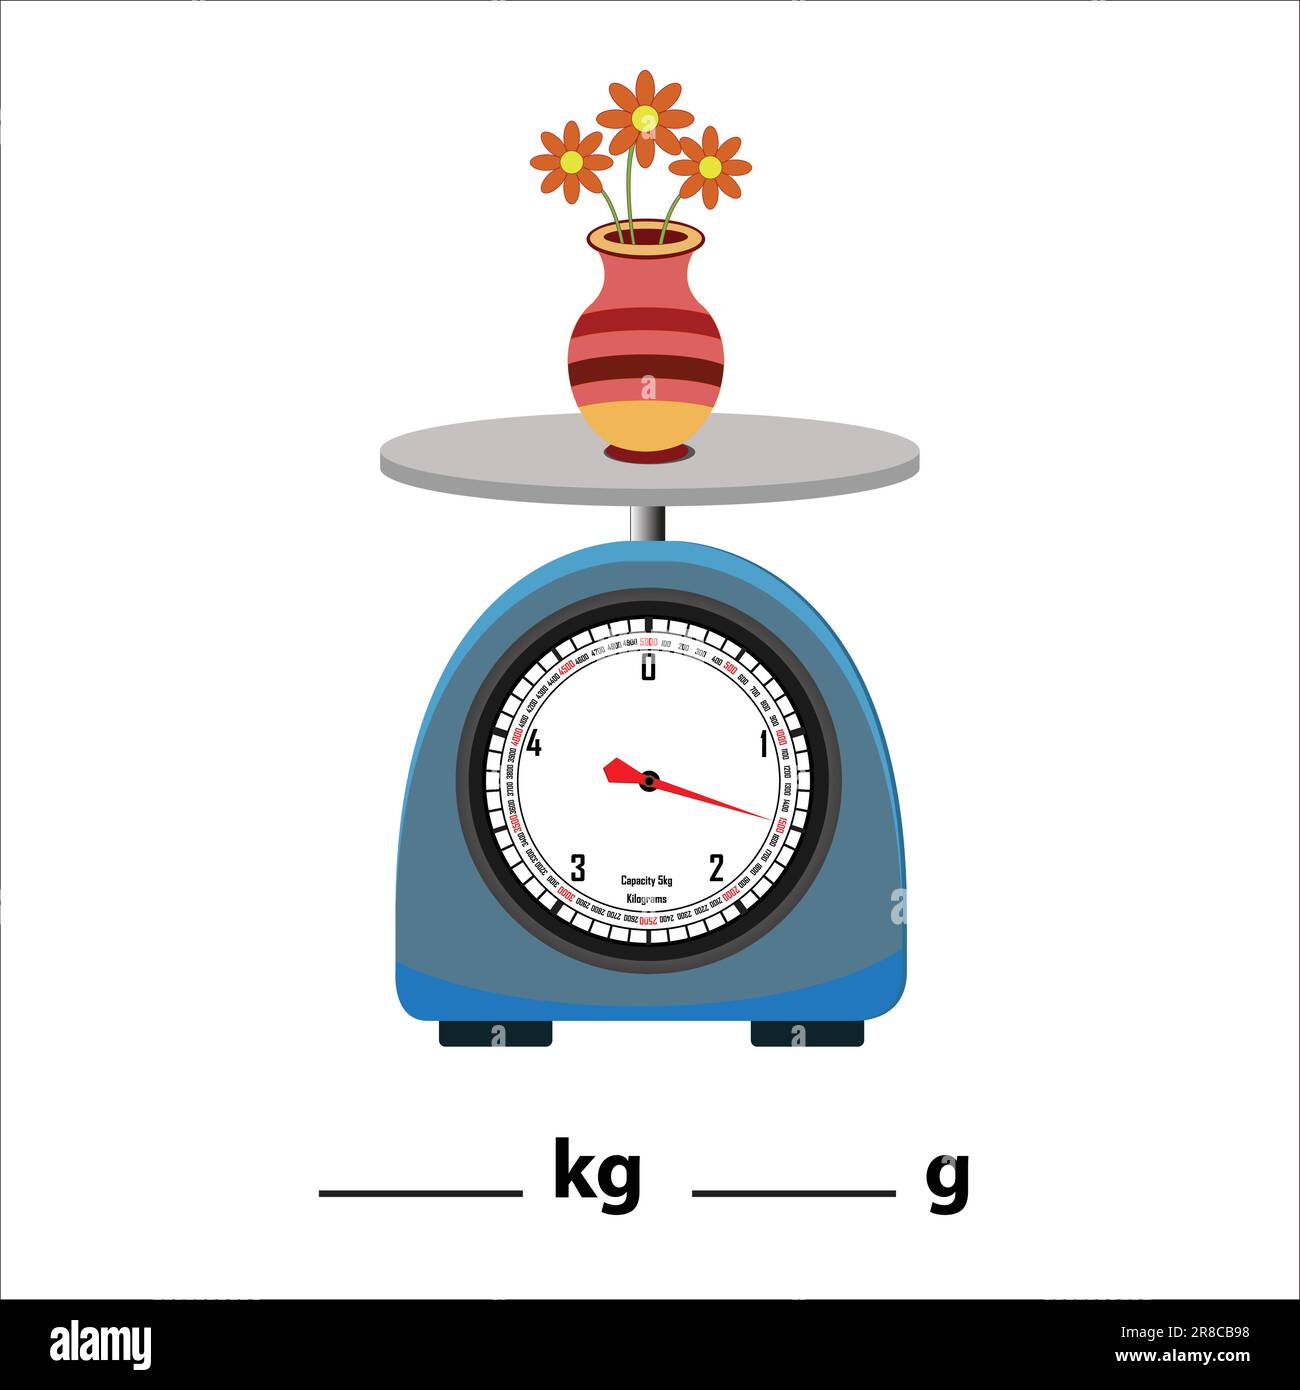 https://c8.alamy.com/comp/2R8CB98/digital-weighing-scale-vase-on-a-weighing-scale-and-isolated-on-white-background-weight-machine-vector-illustration-food-weight-kitchen-scale-2R8CB98.jpg